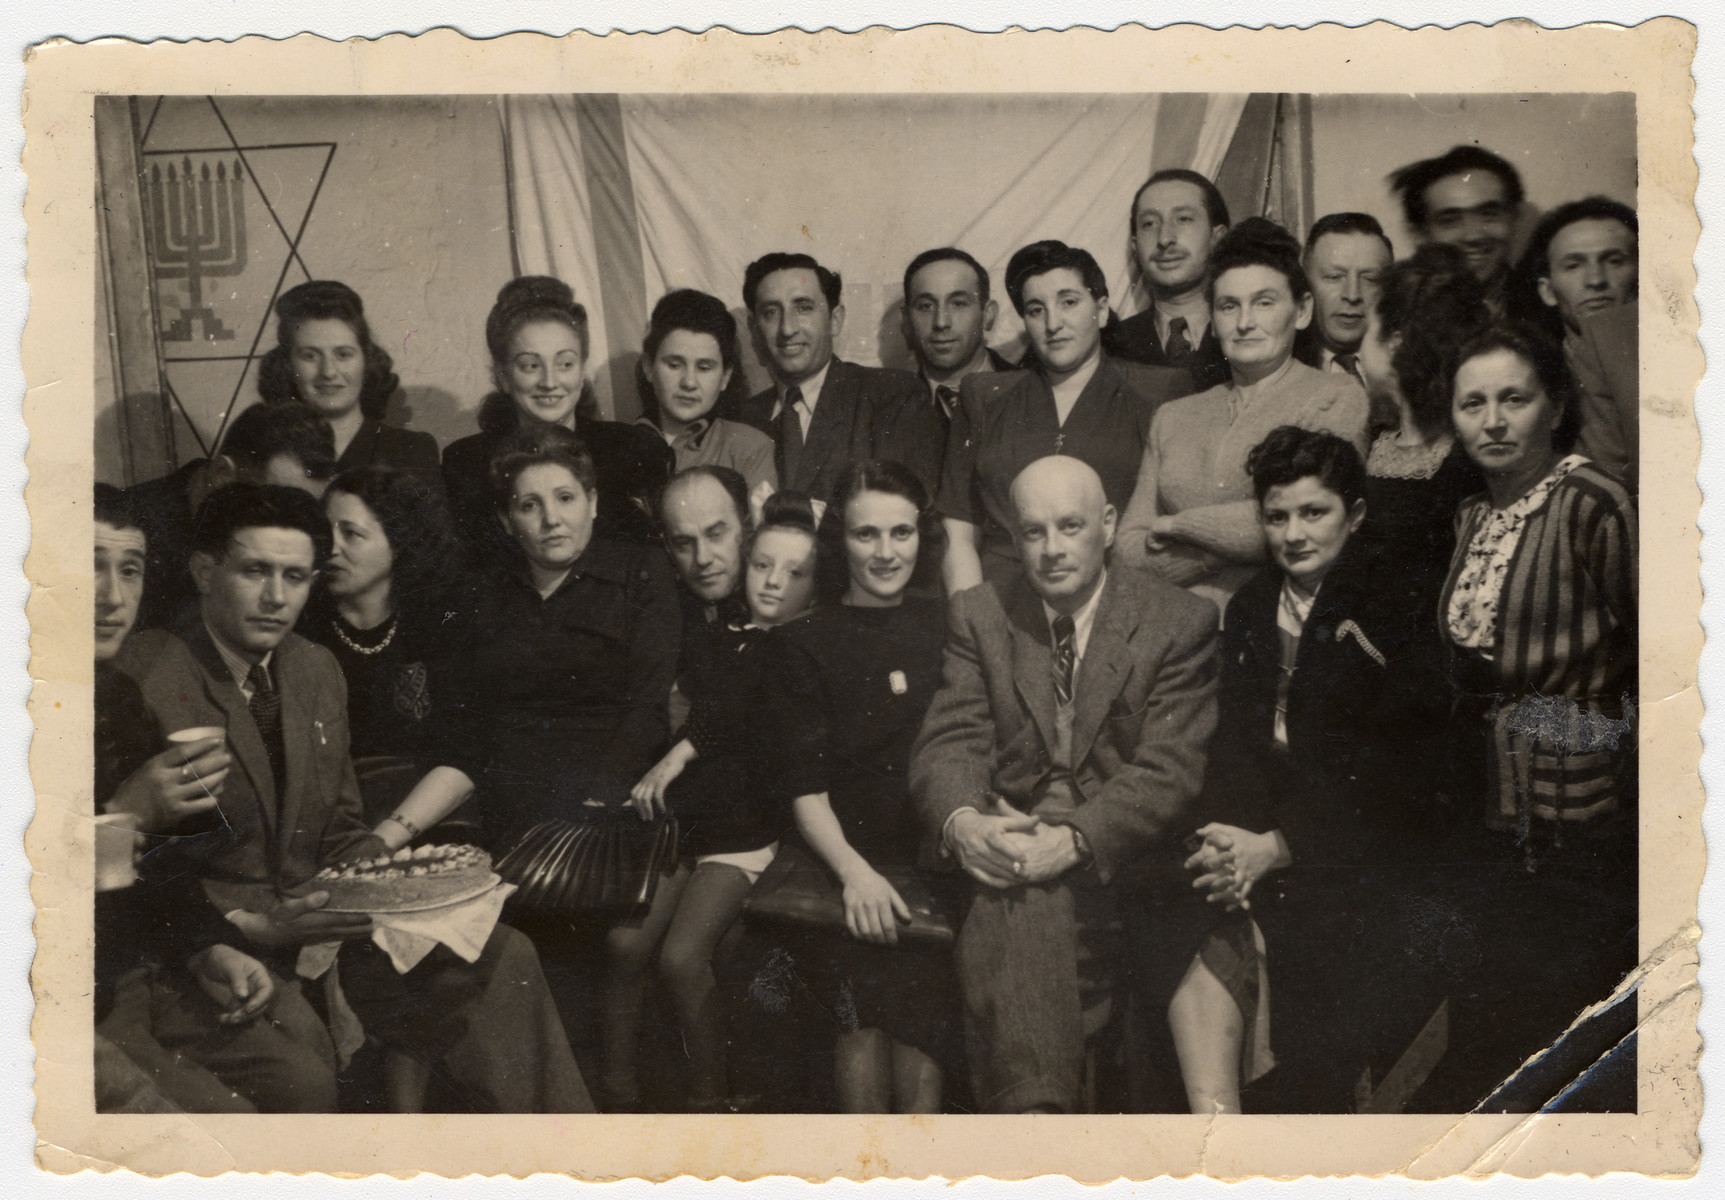 Group photograph of displaced persons in the Foehrenwald Displaced Persons Camp.

Among those pictured are Fancia Silberschein Hellman (back row, far left), Regina Gertner (back row, second from the left), Samuel Gertner (back row, fifth from the left), and Lucy Gertner (front row, child fifth from the left).